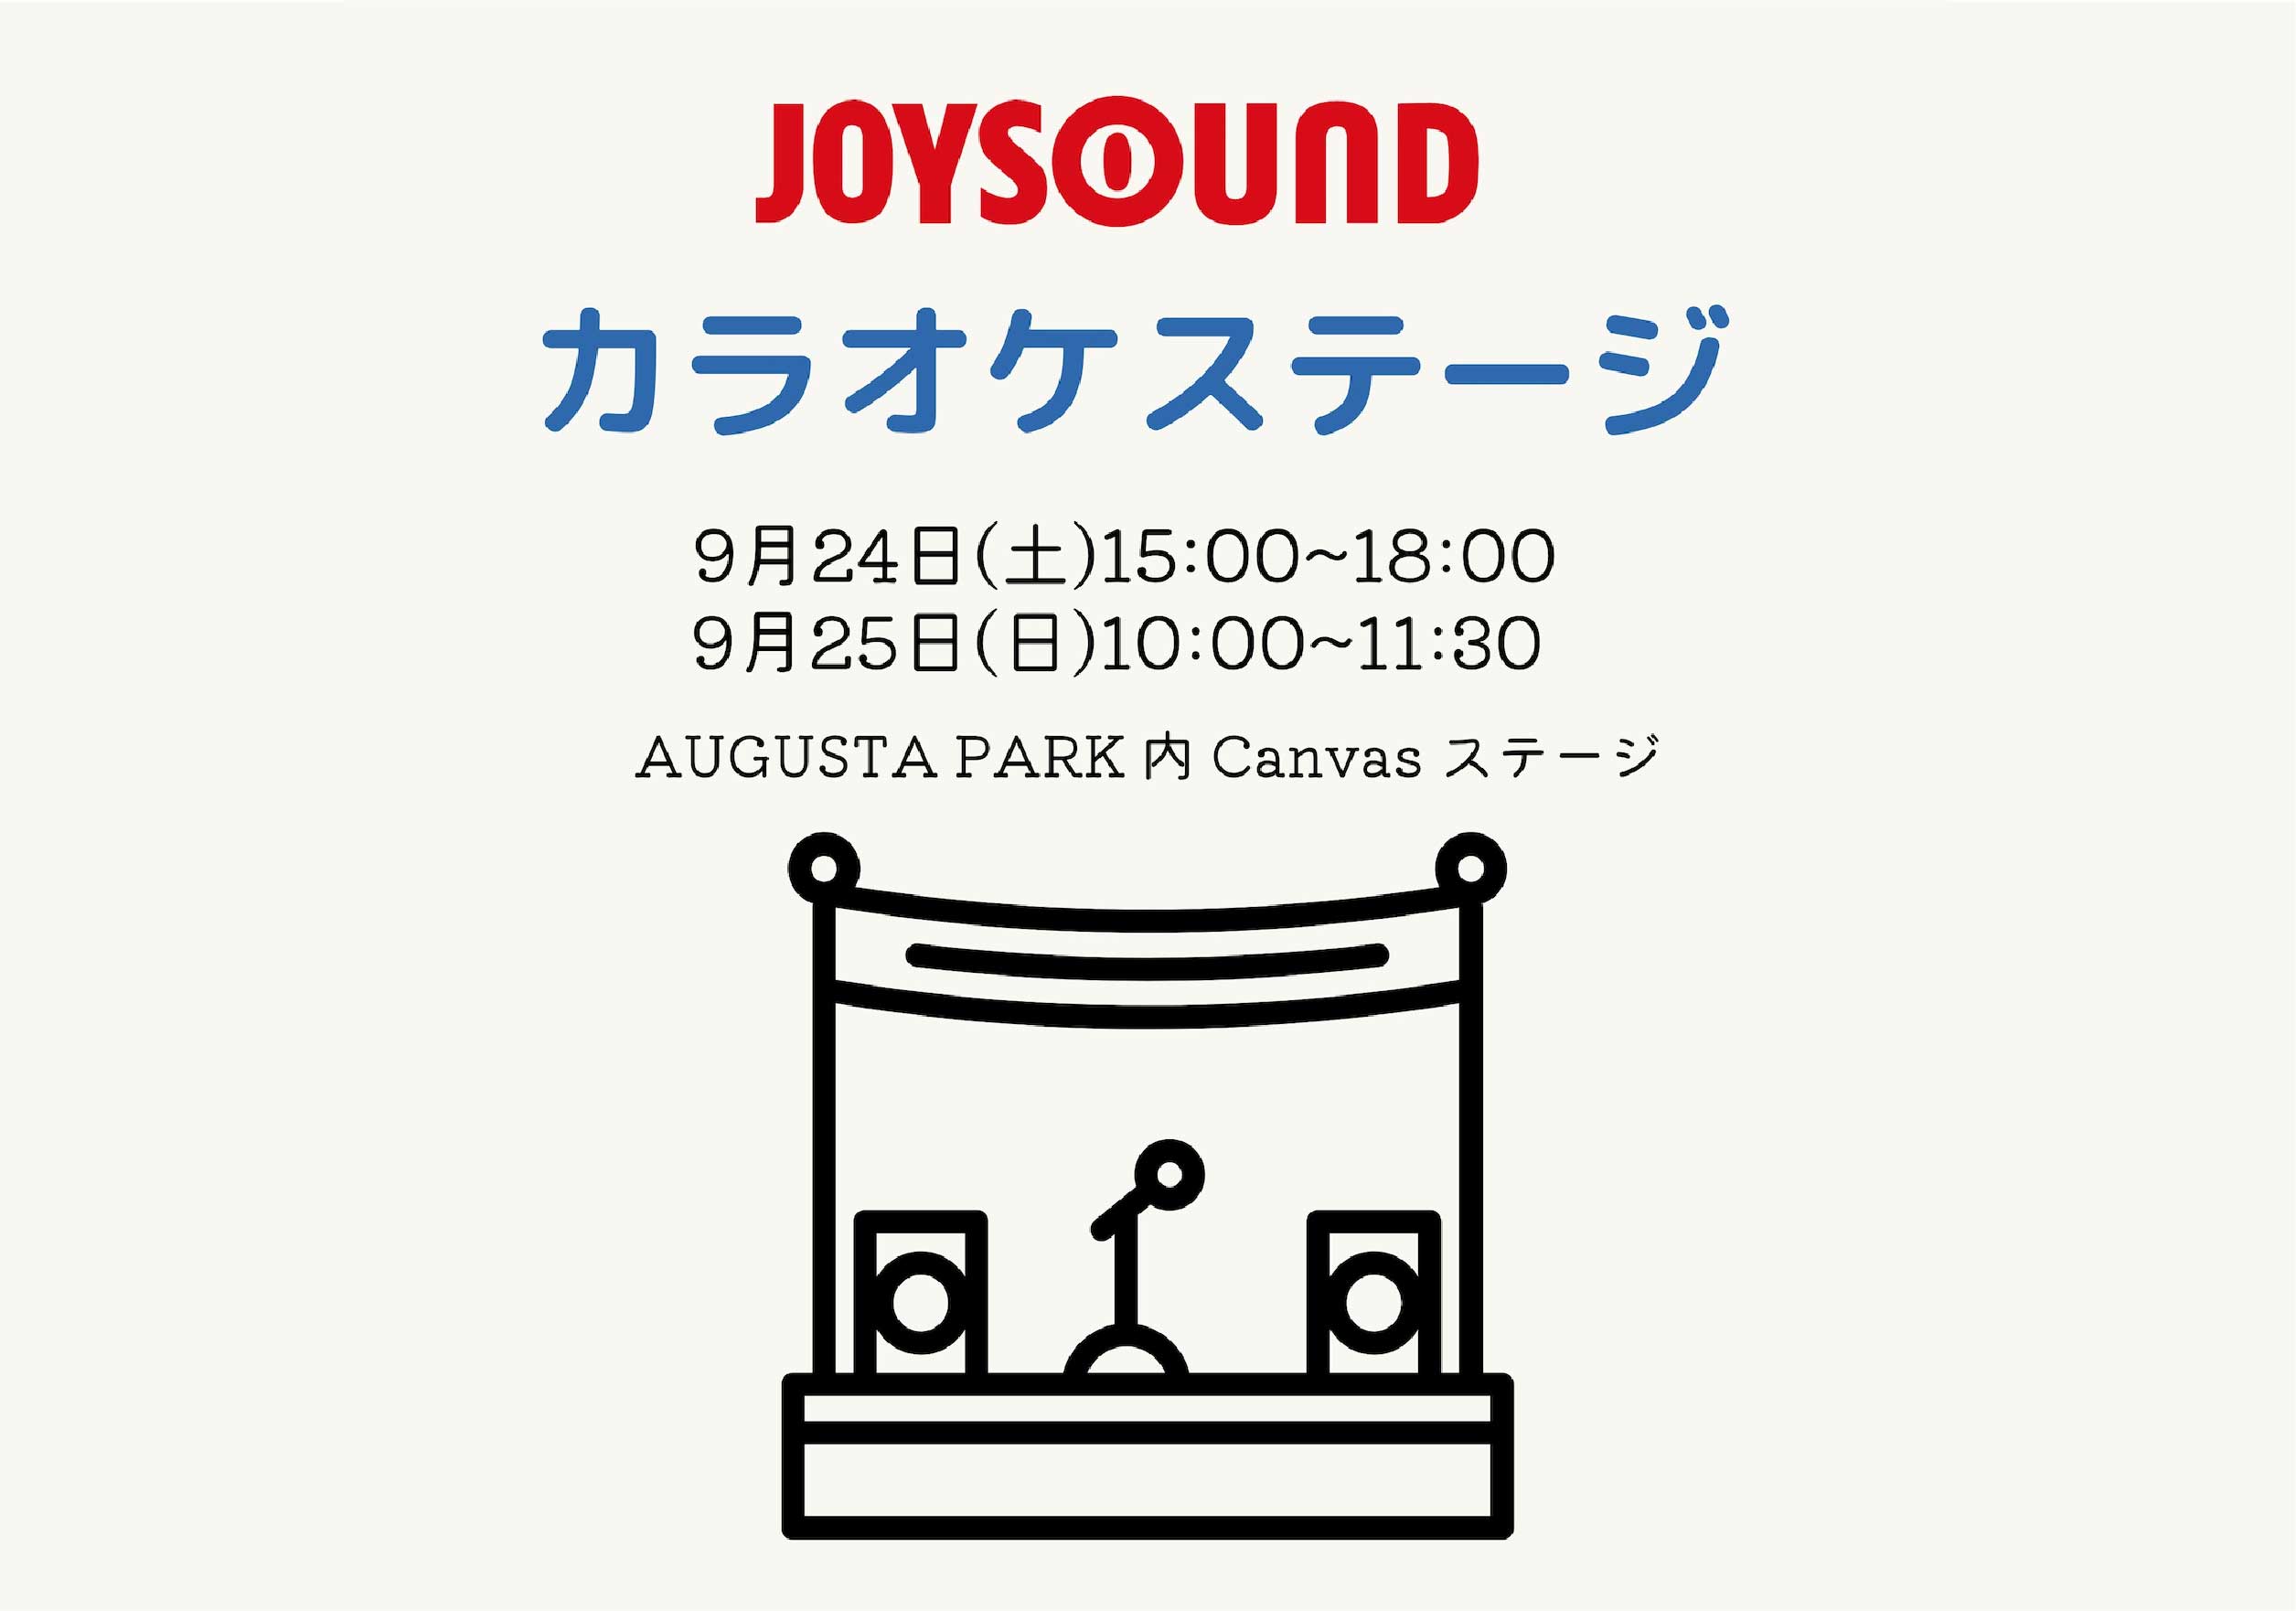 JOYSOUND karaoke stage will be held again this year!